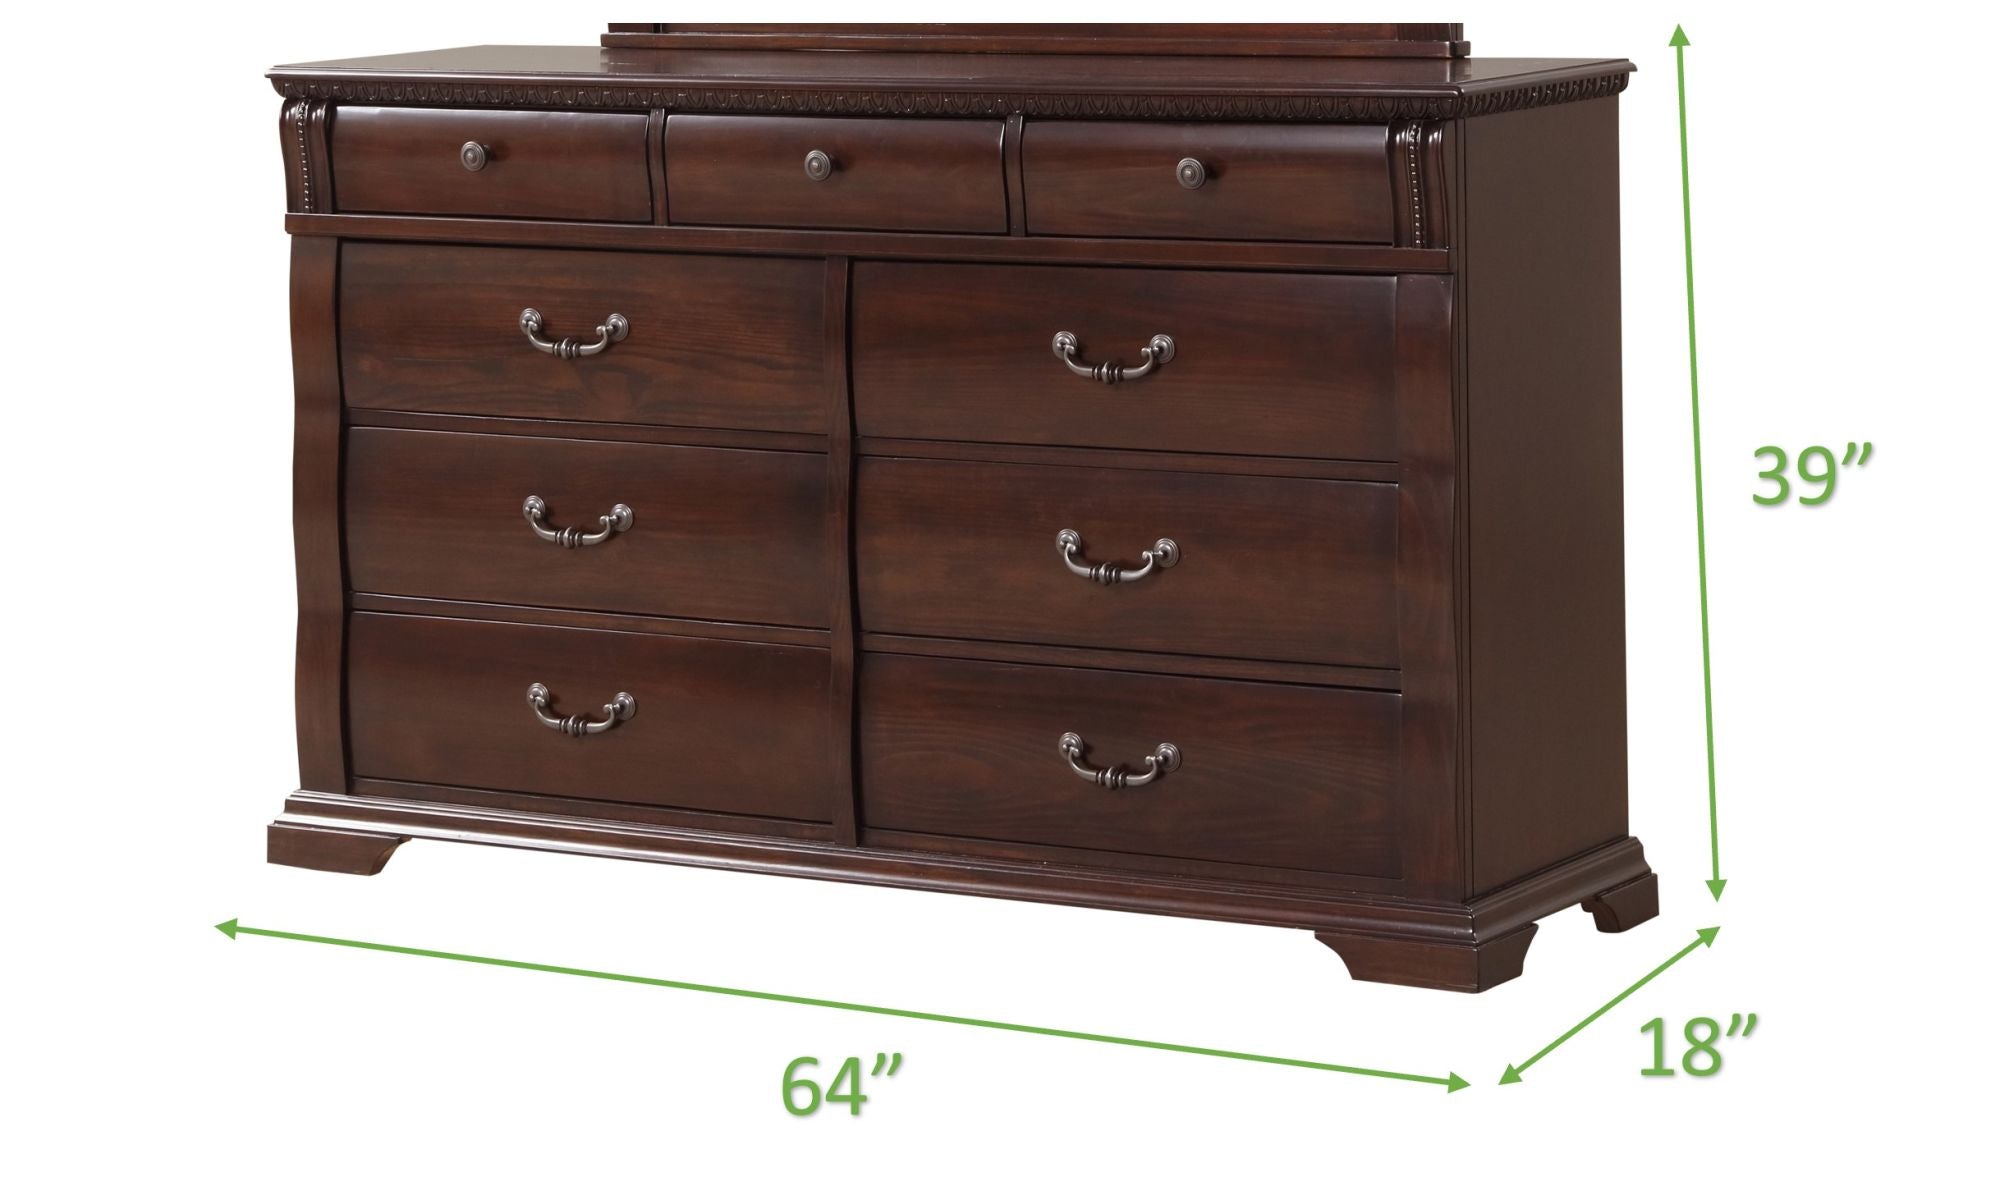 Aspen Queen 5 Pc Traditional Bedroom set made with Wood in Cherry